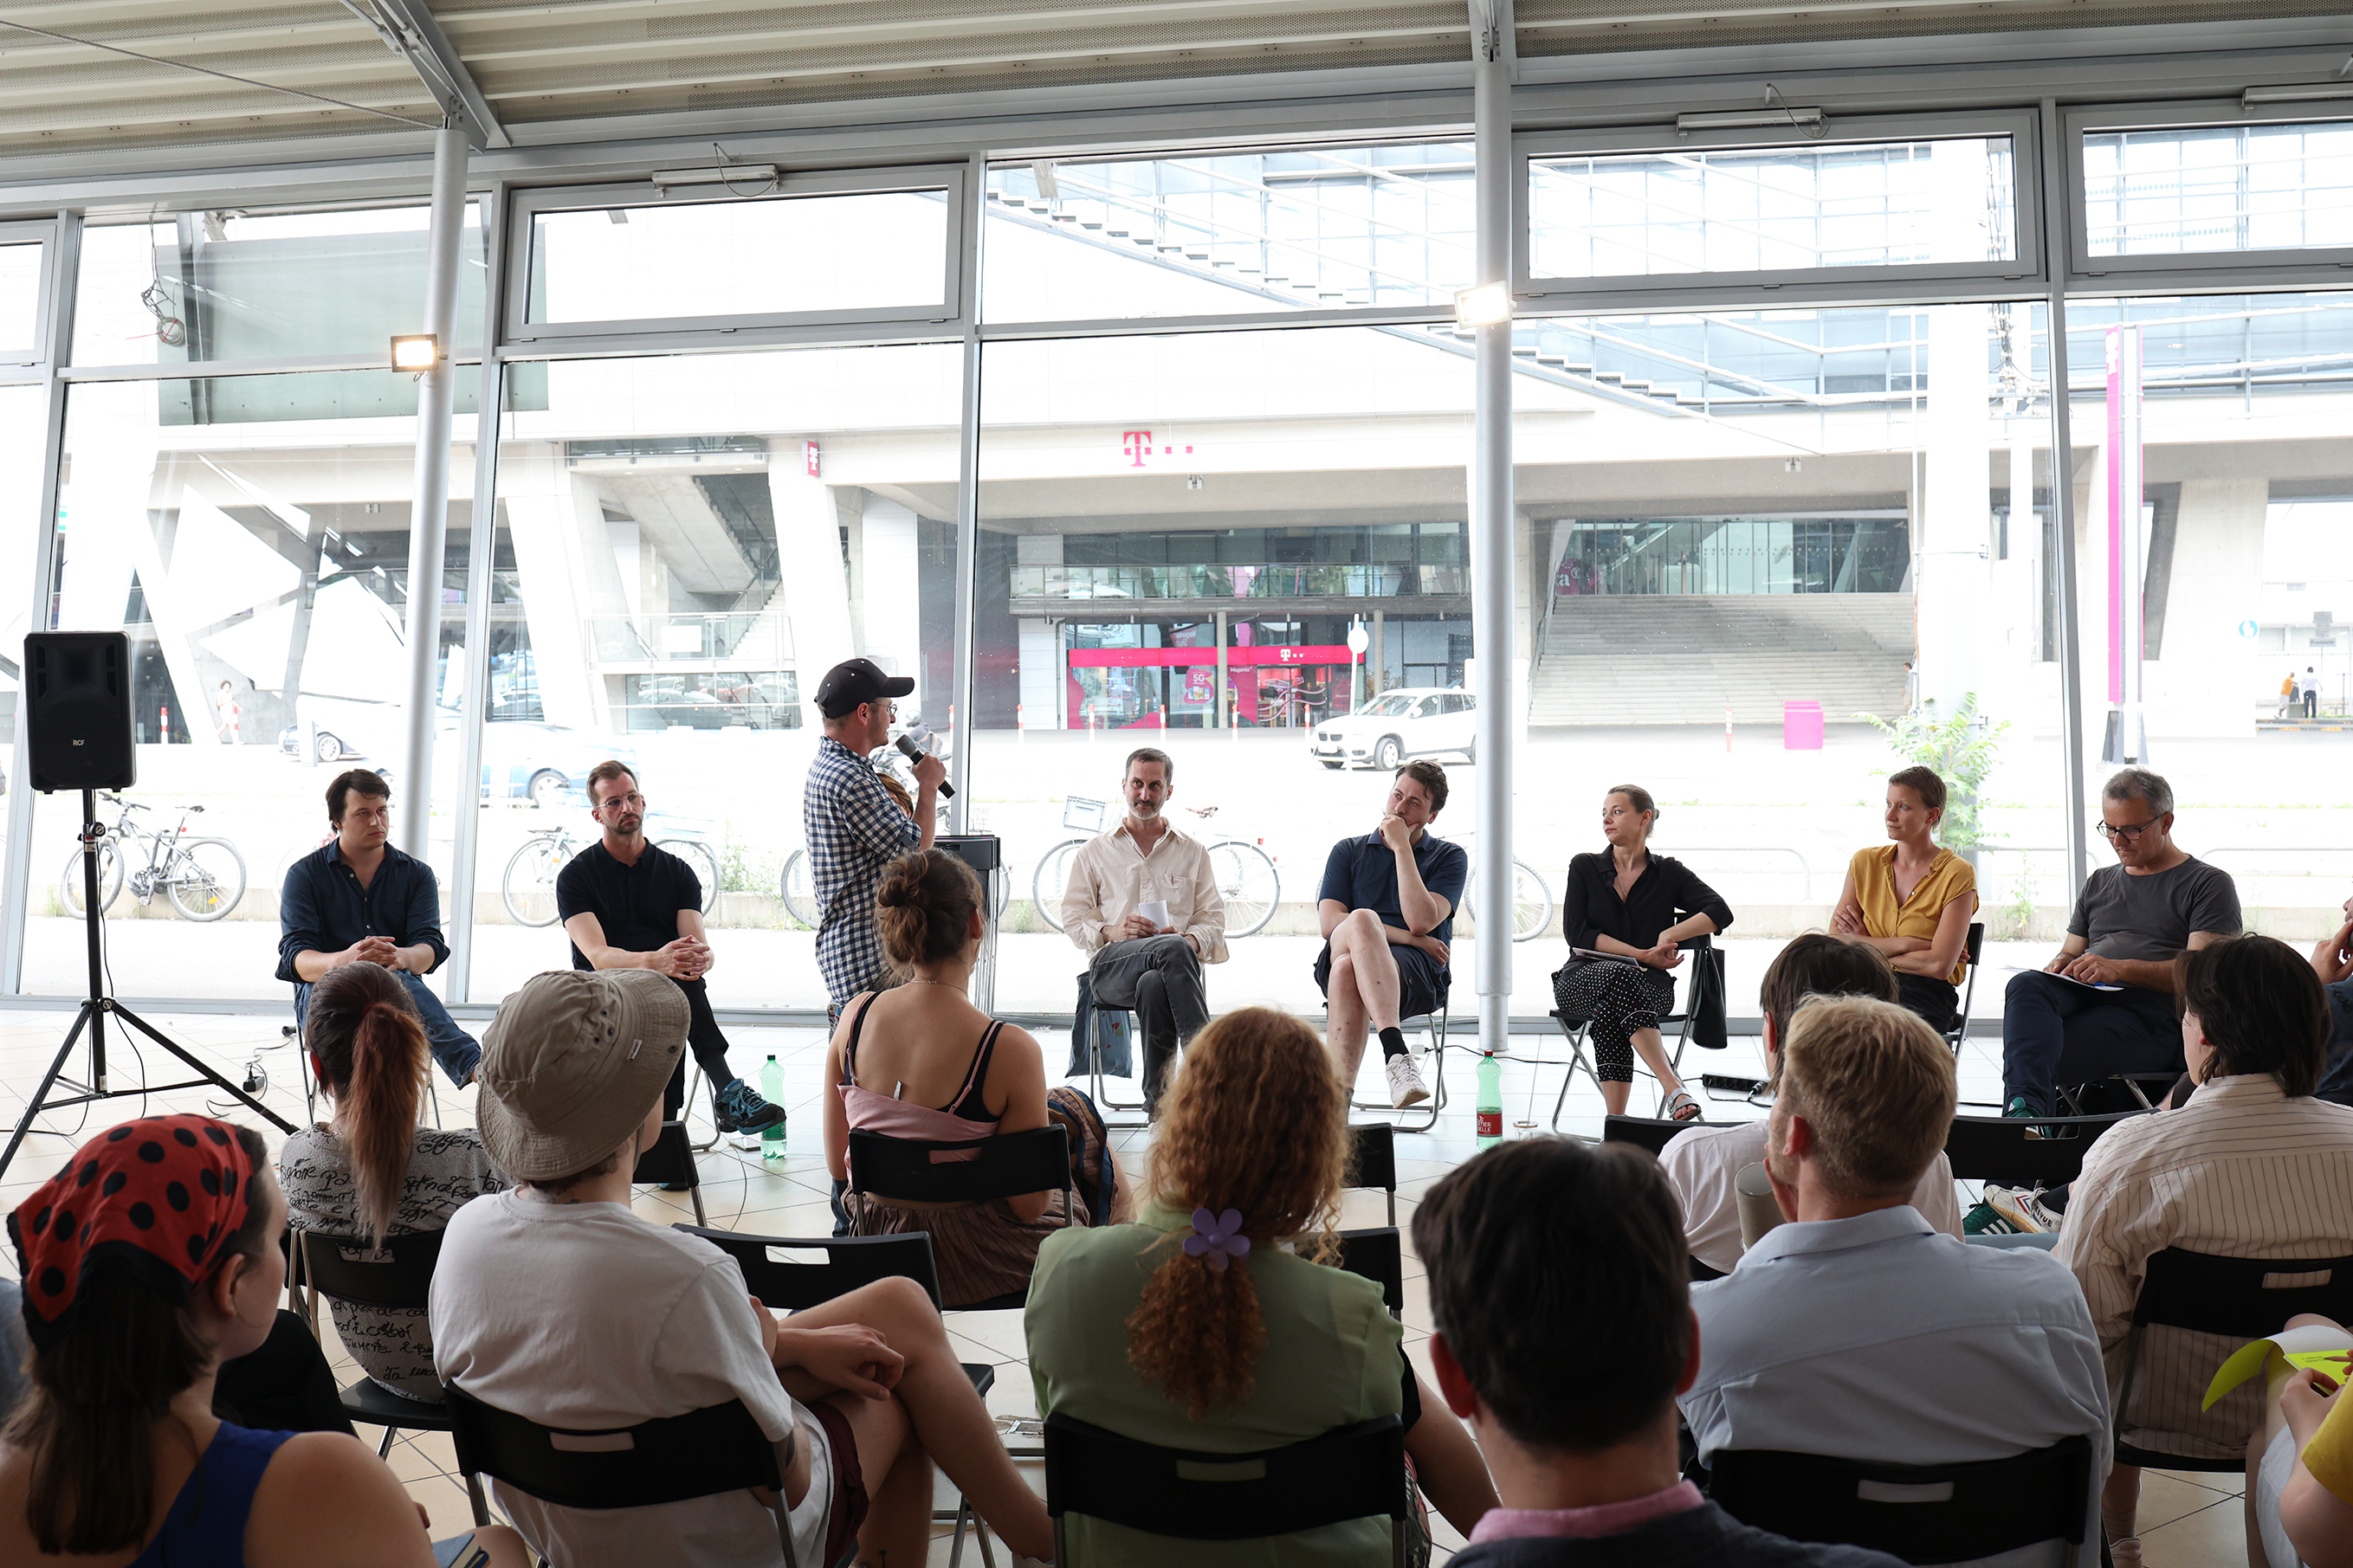 Jelena Pajic’s photo shows a round table. It took place at Independent Synergies, Vienna, in June 2022.